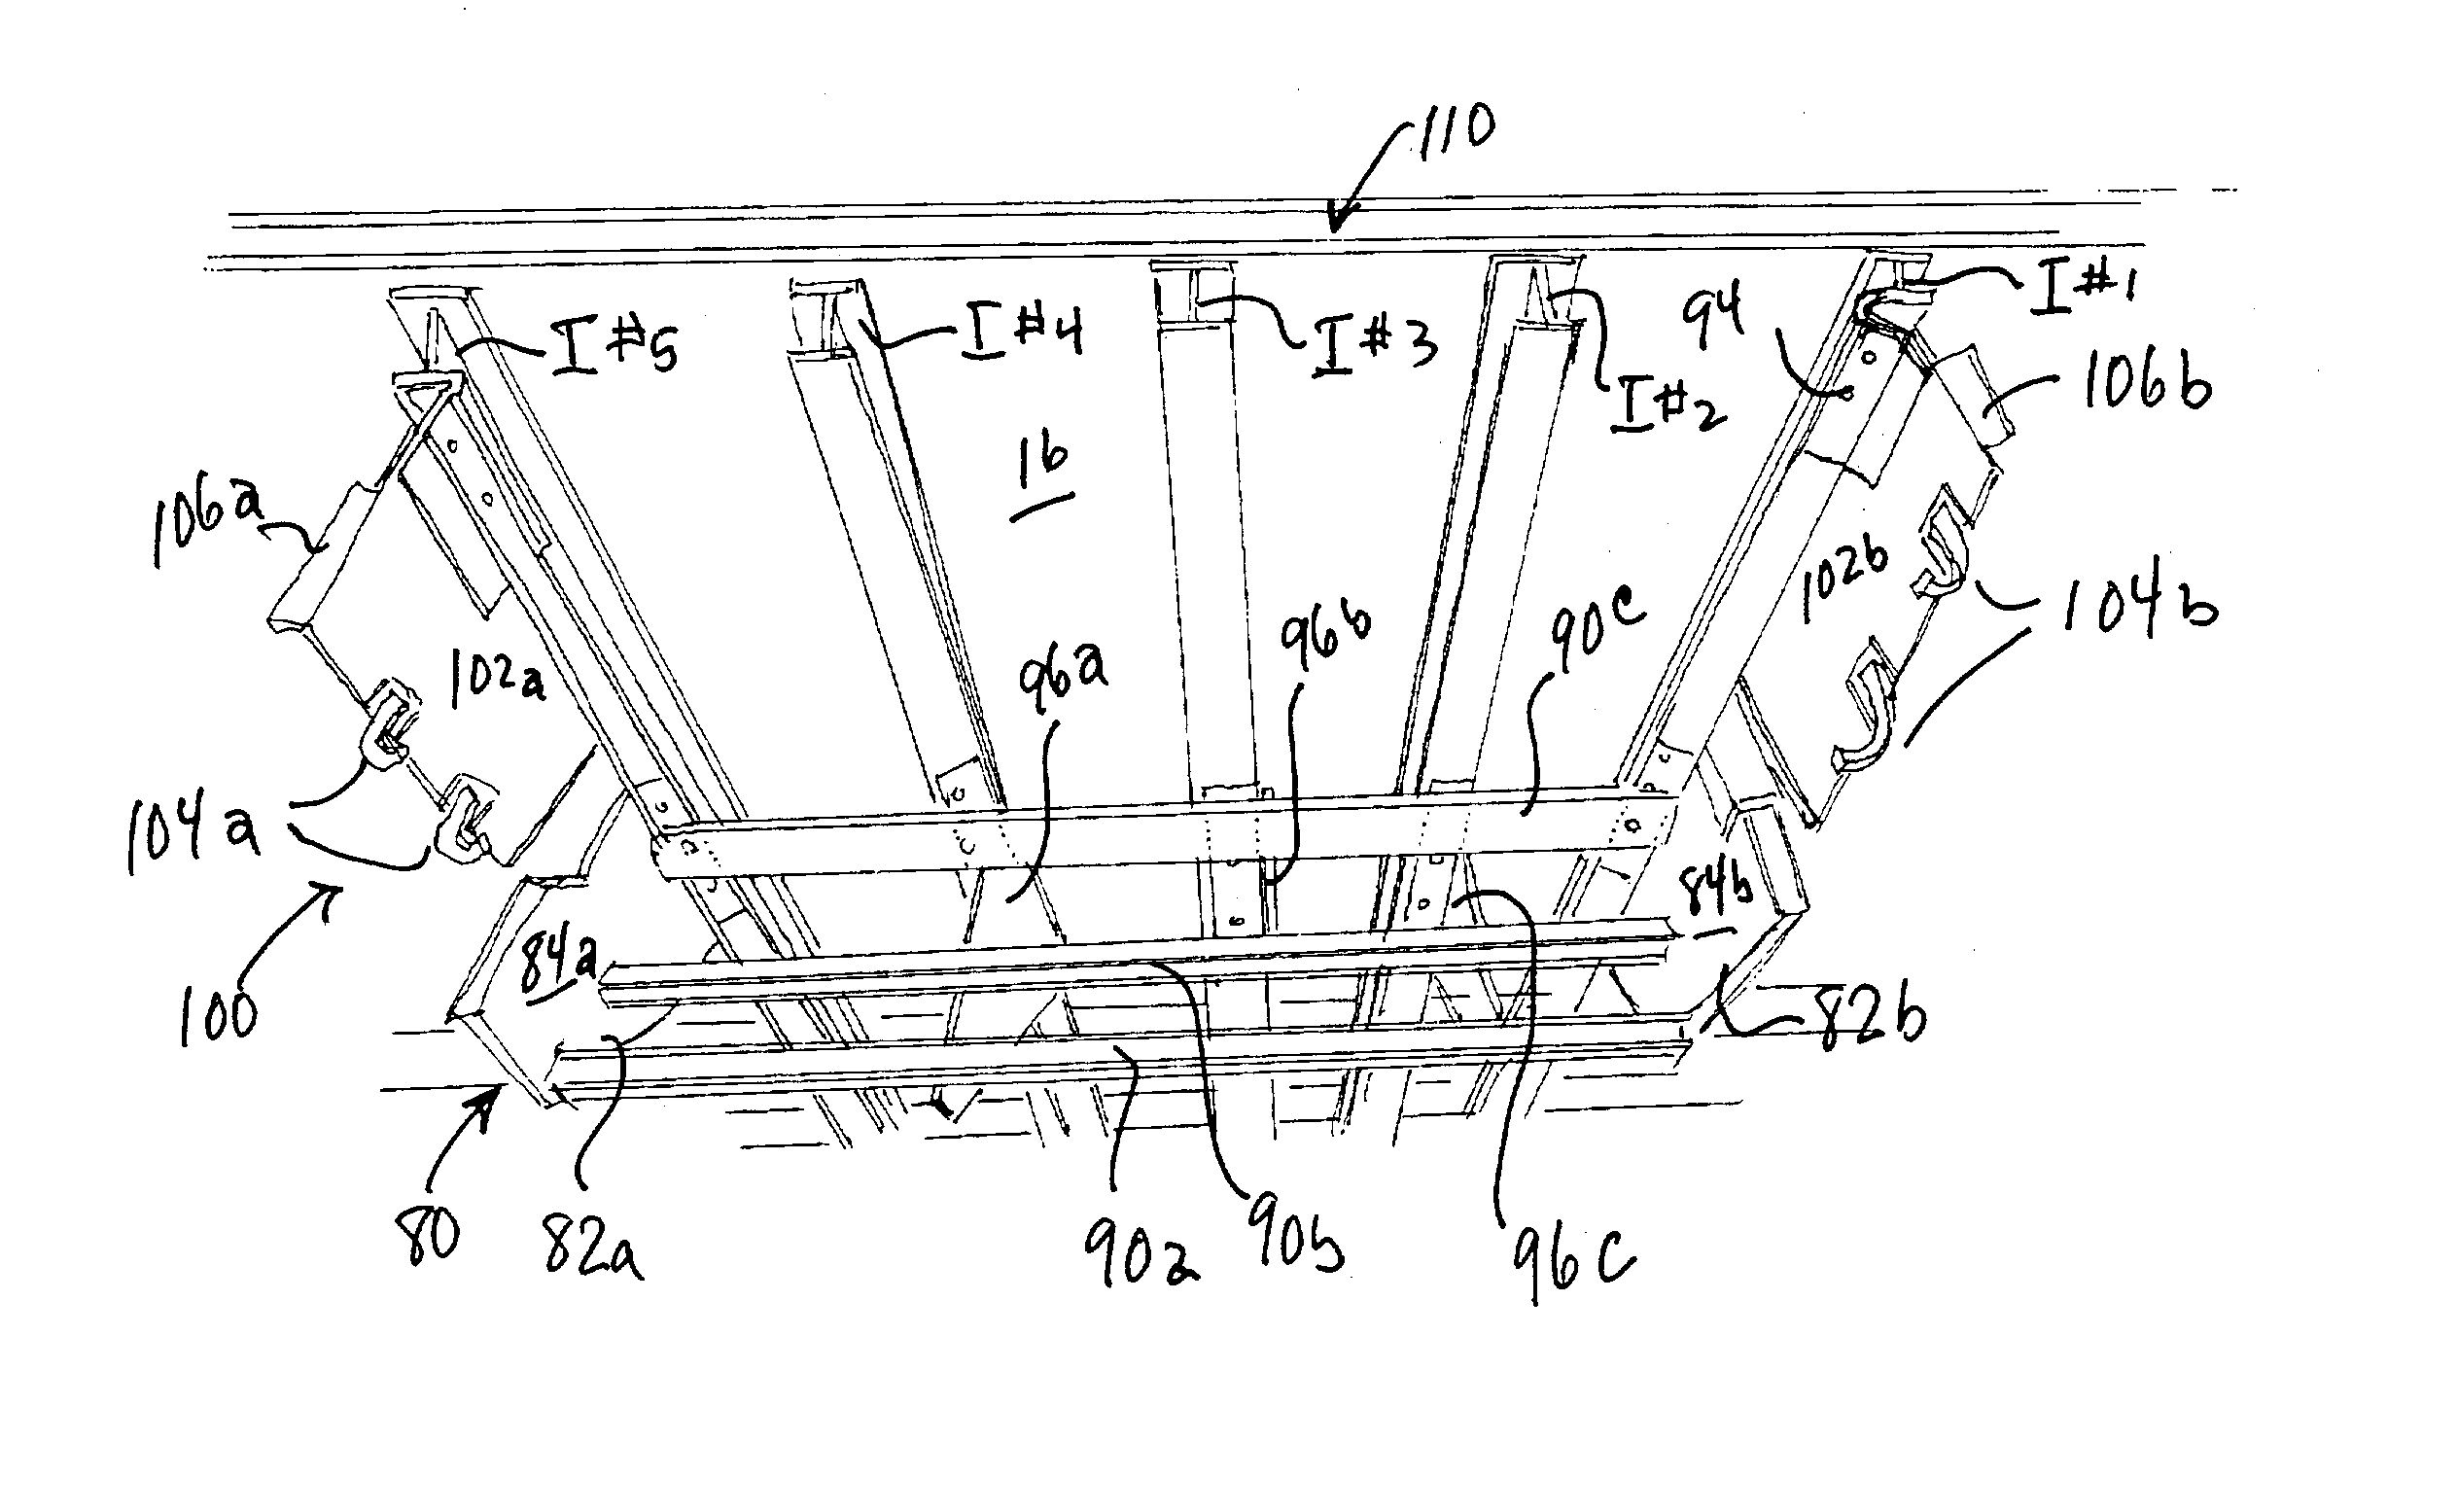 Private pallet-box cargo shipping system